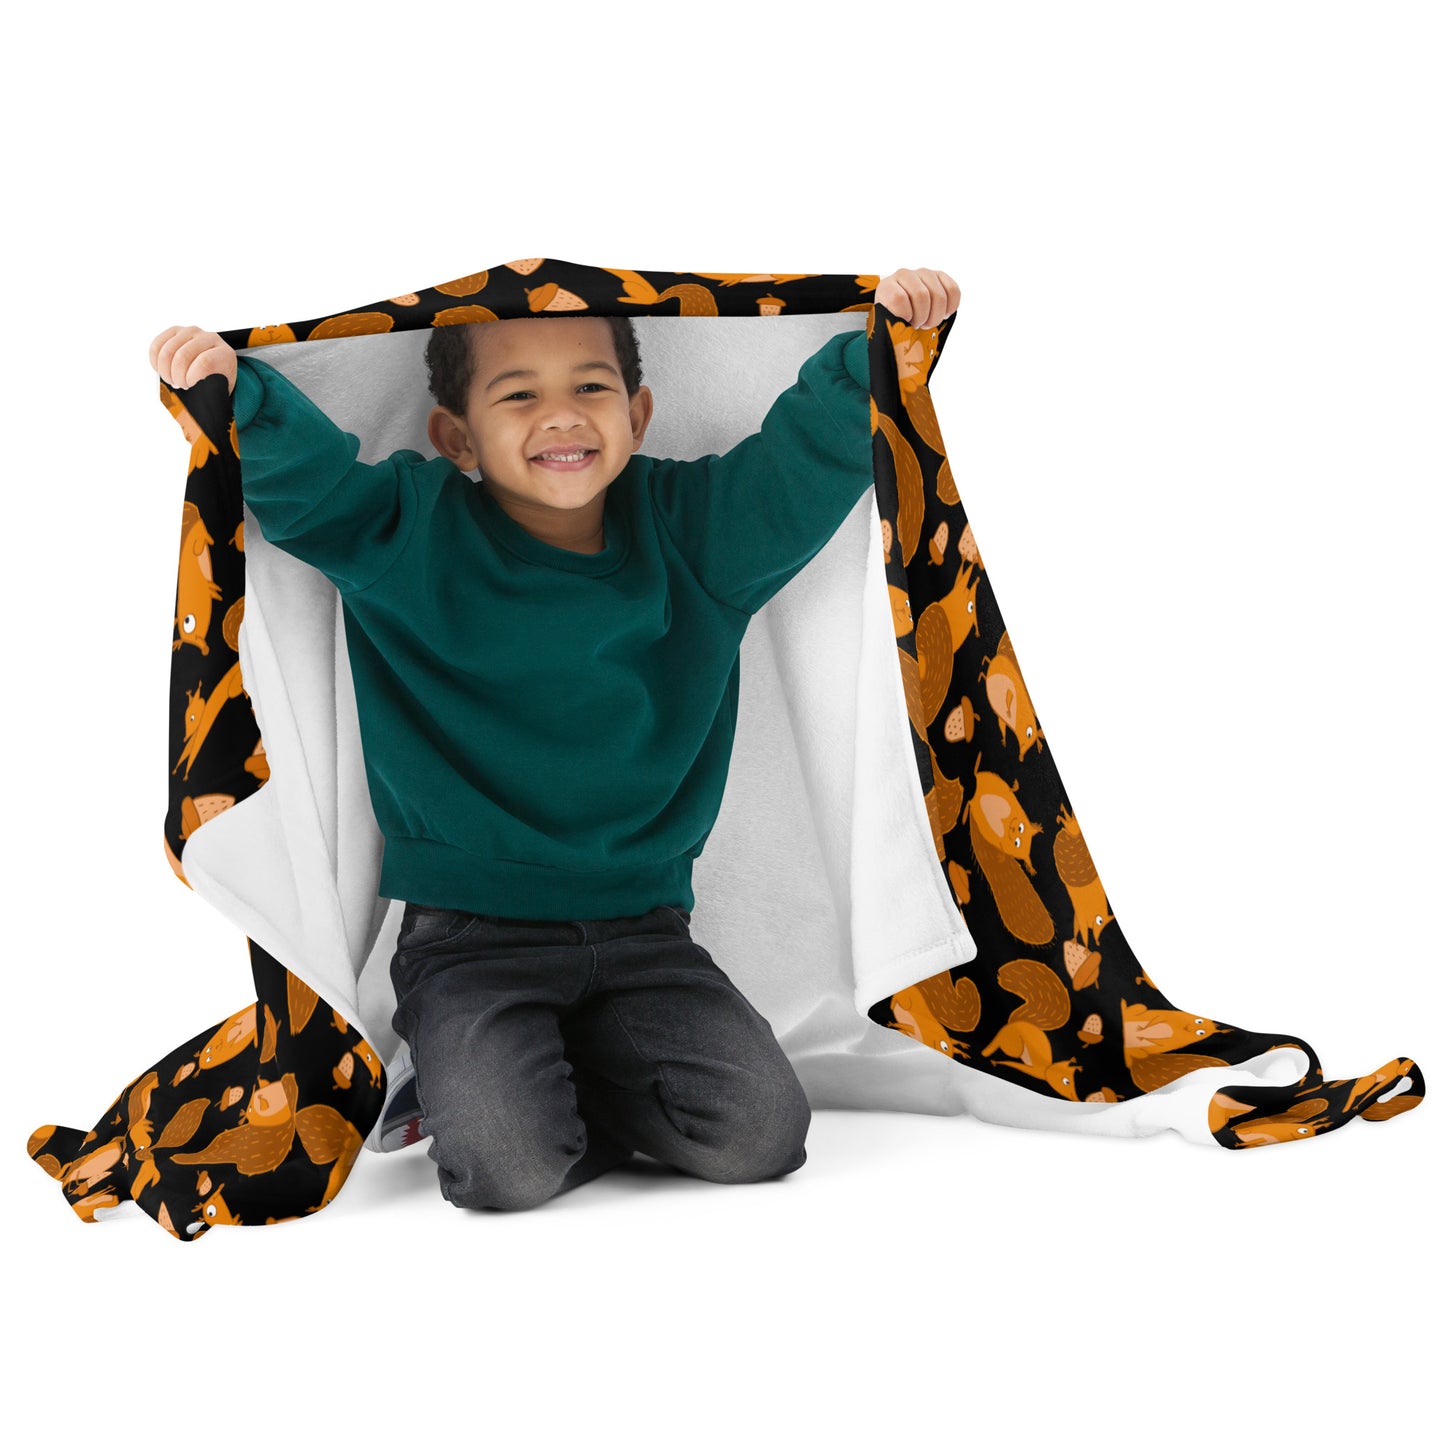 Funny little boy with Throw blanket black color with funny orange squirrels and nuts